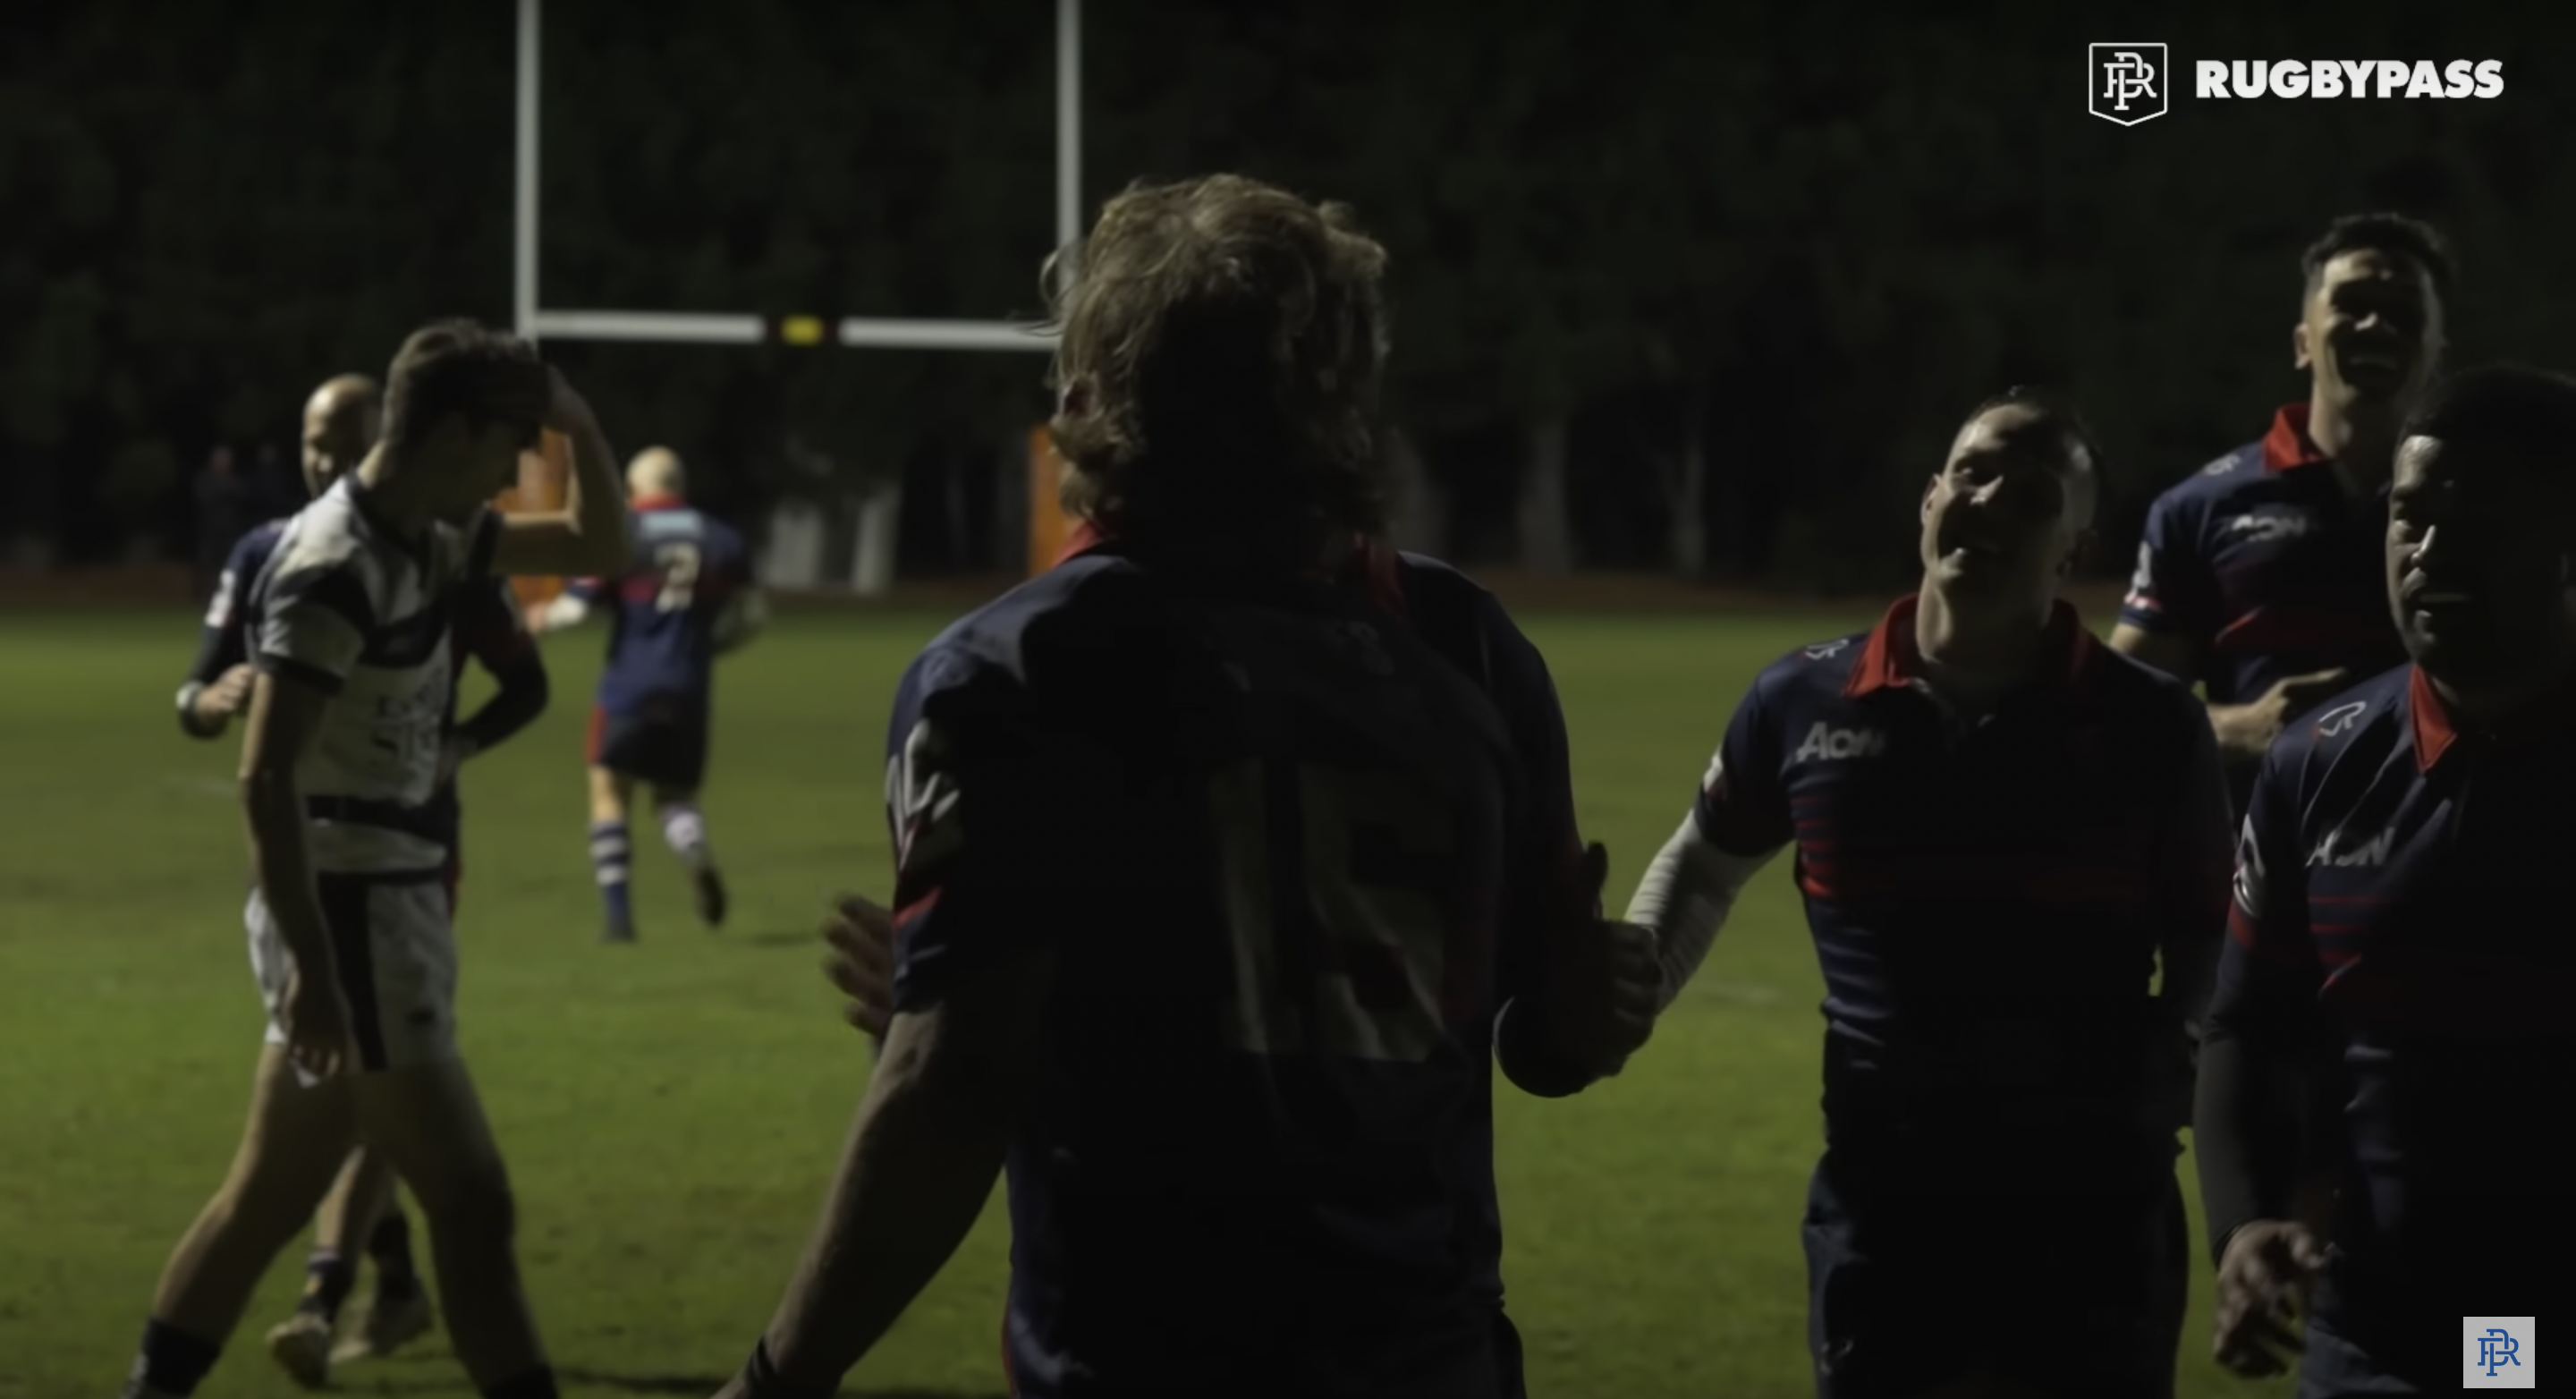 All Black tears it up playing amateur rugby in New Zealand